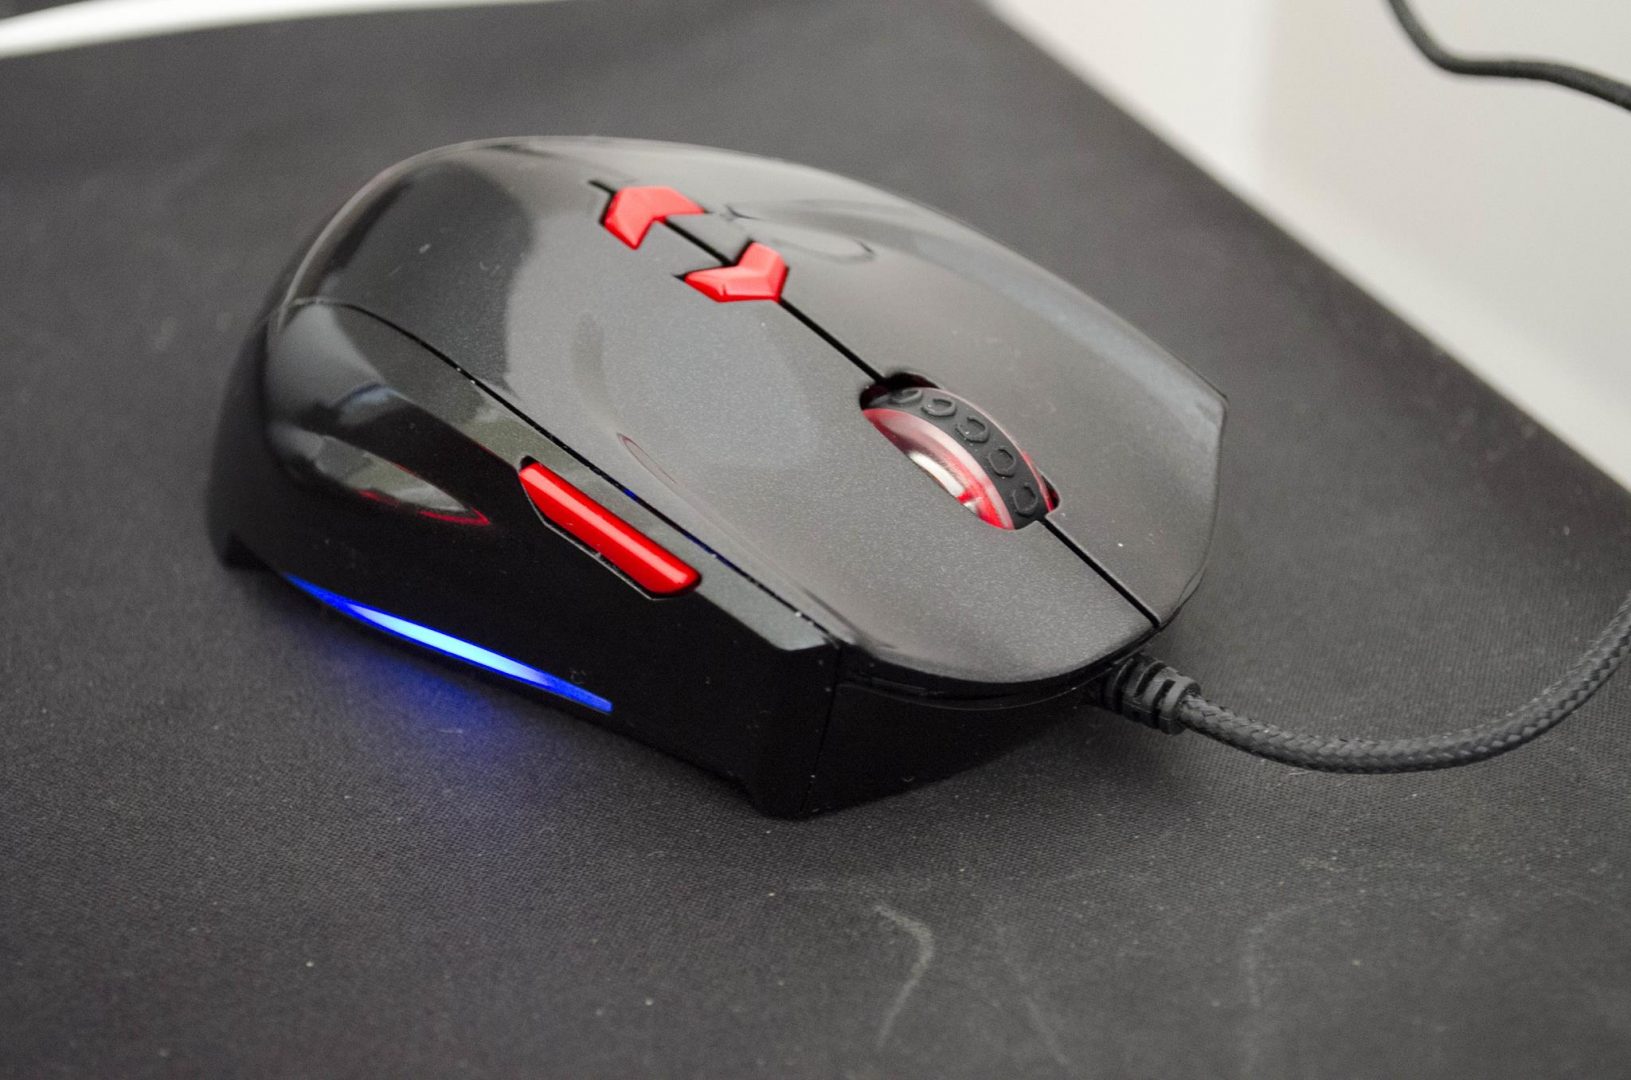 Tt eSPORTS Theron Plus Smart Mouse Review